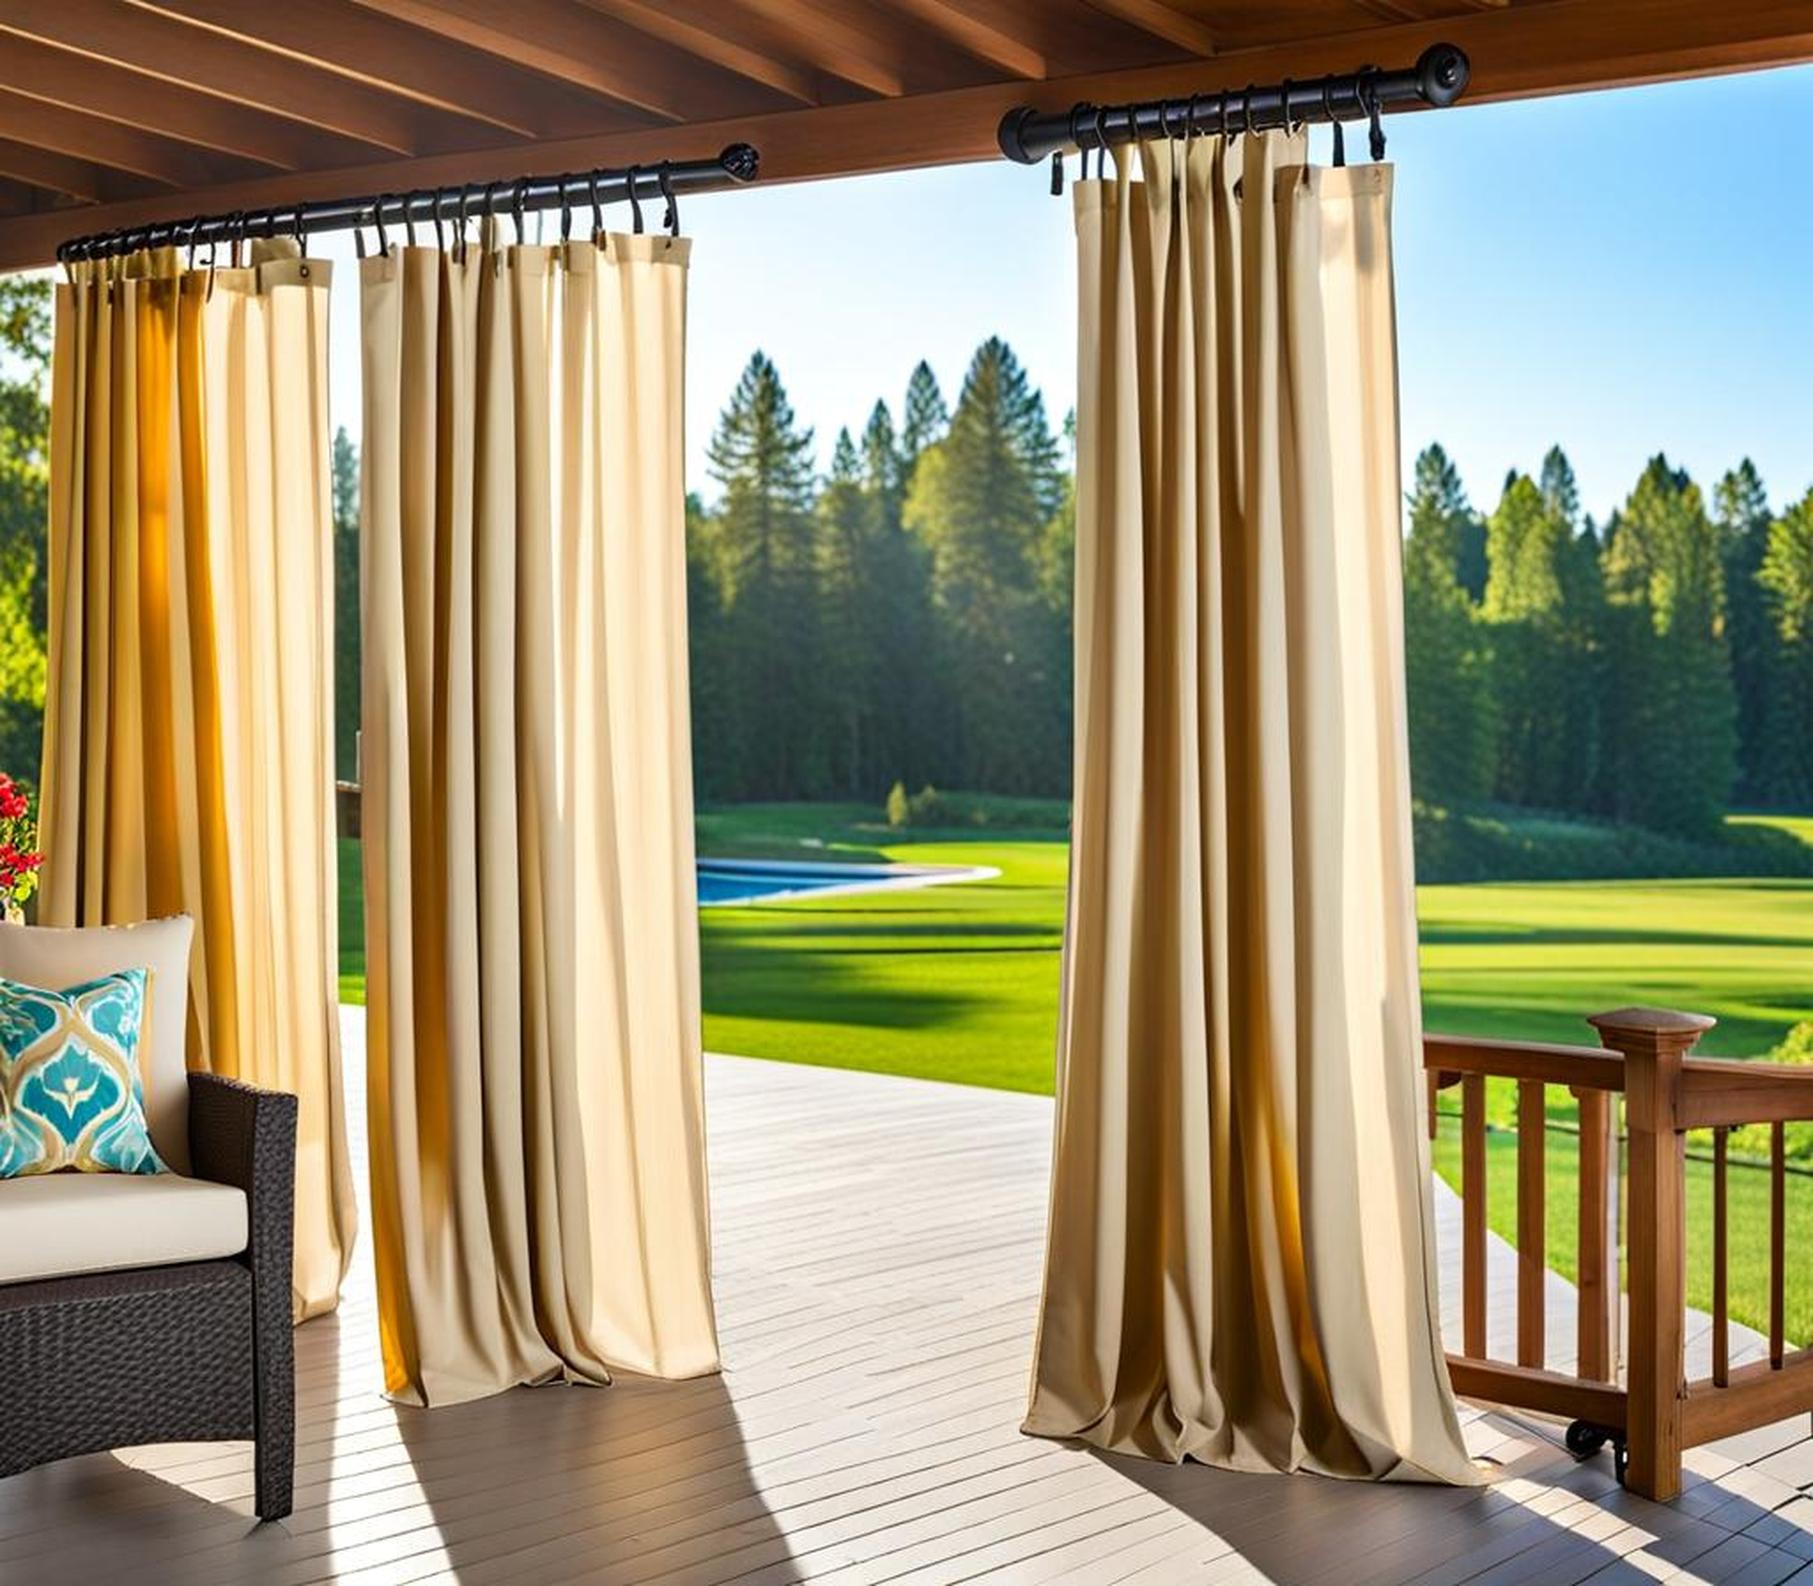 how to weigh down outdoor curtains